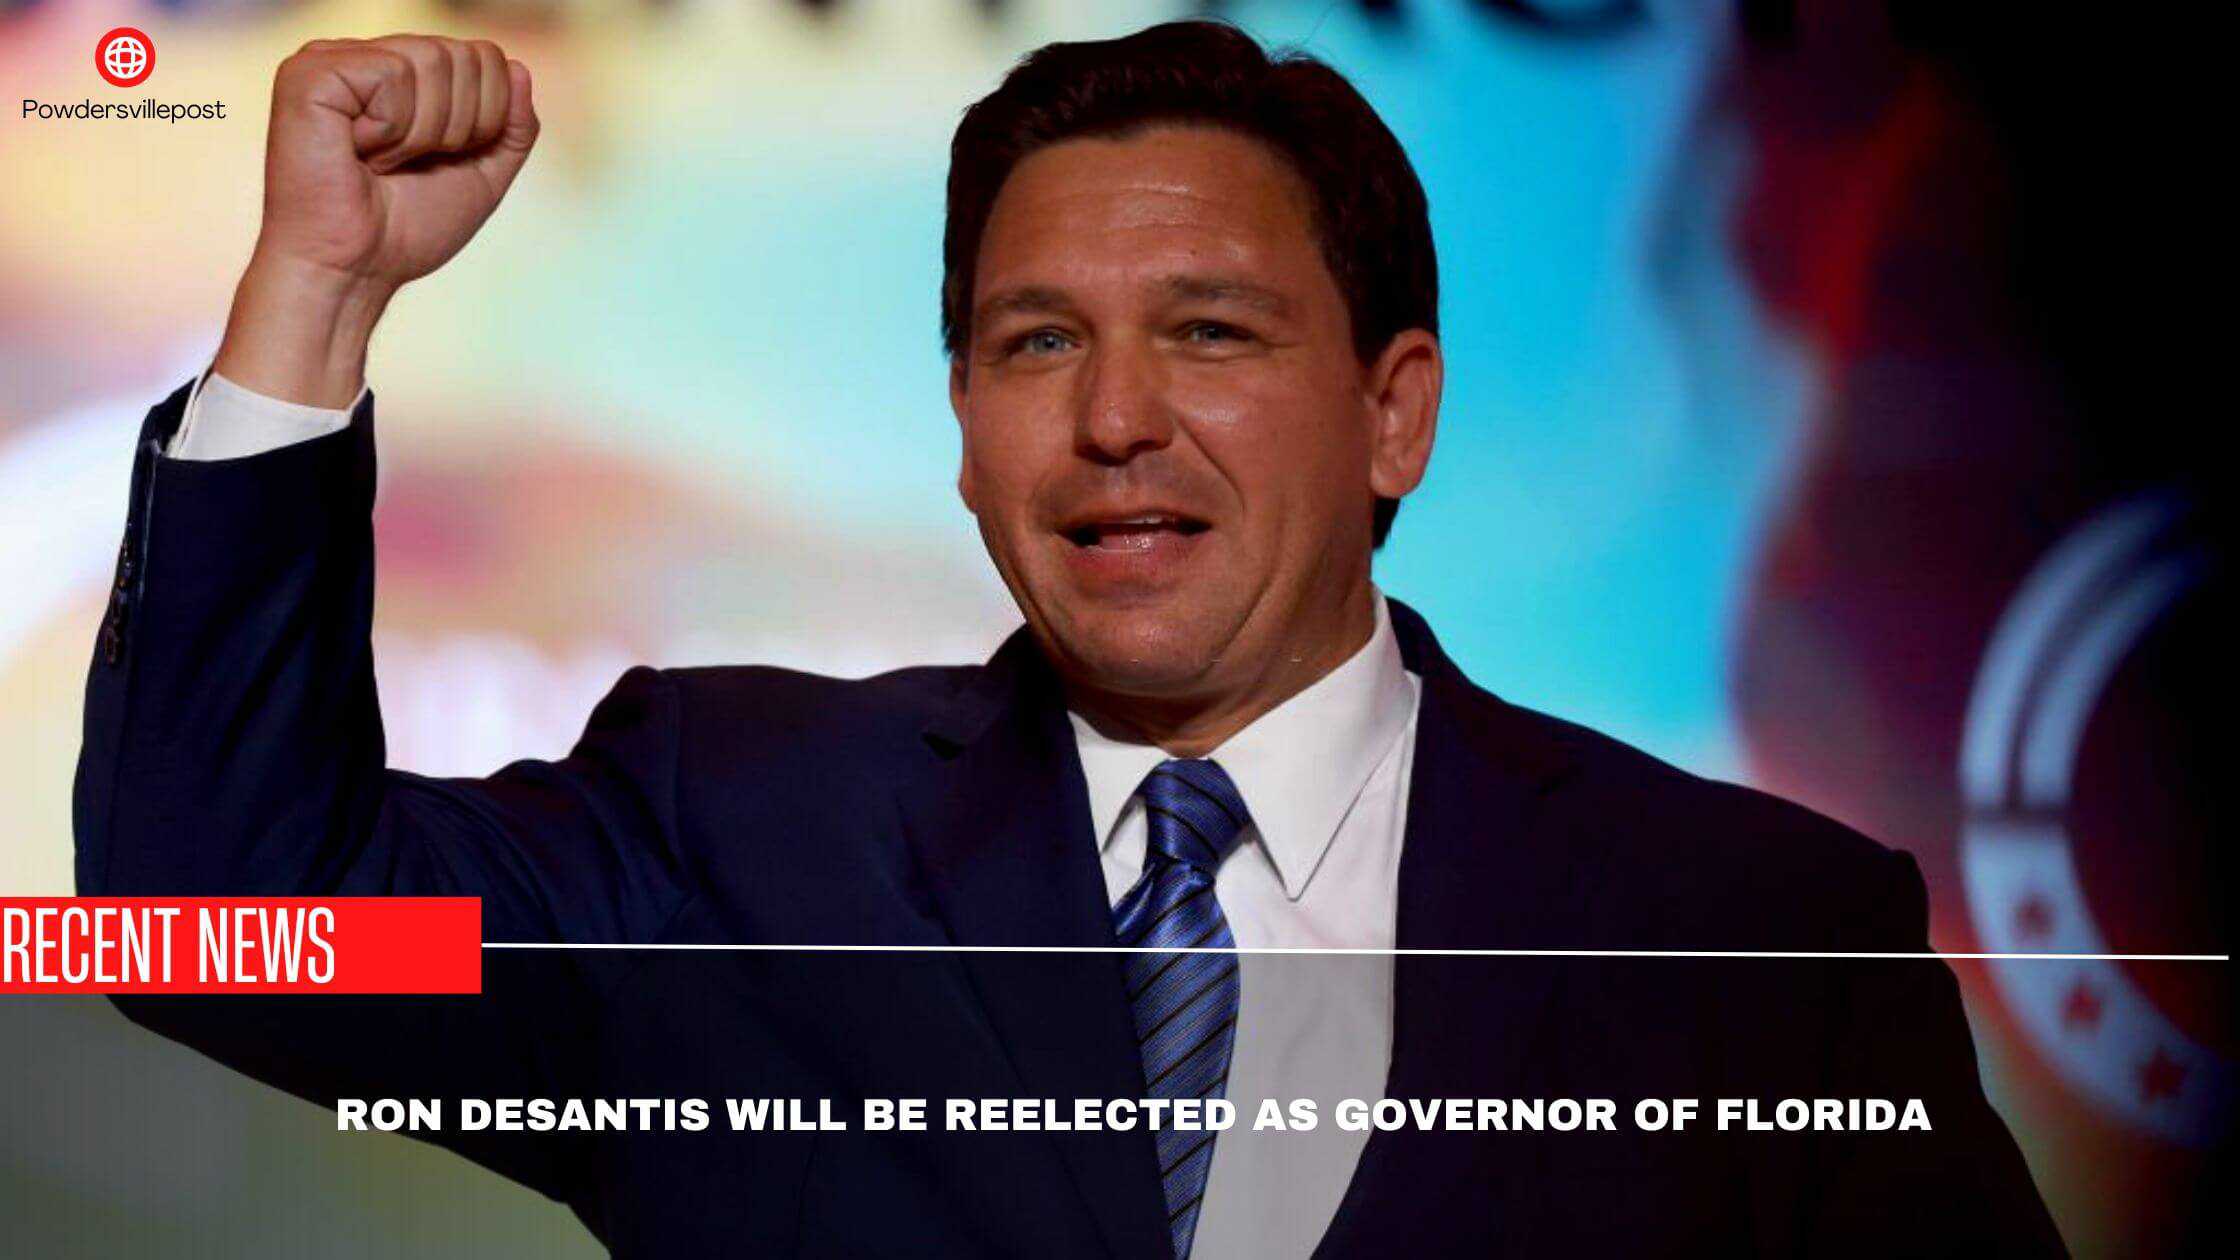 Ron Desantis Will Be Reelected As Governor Of Florida